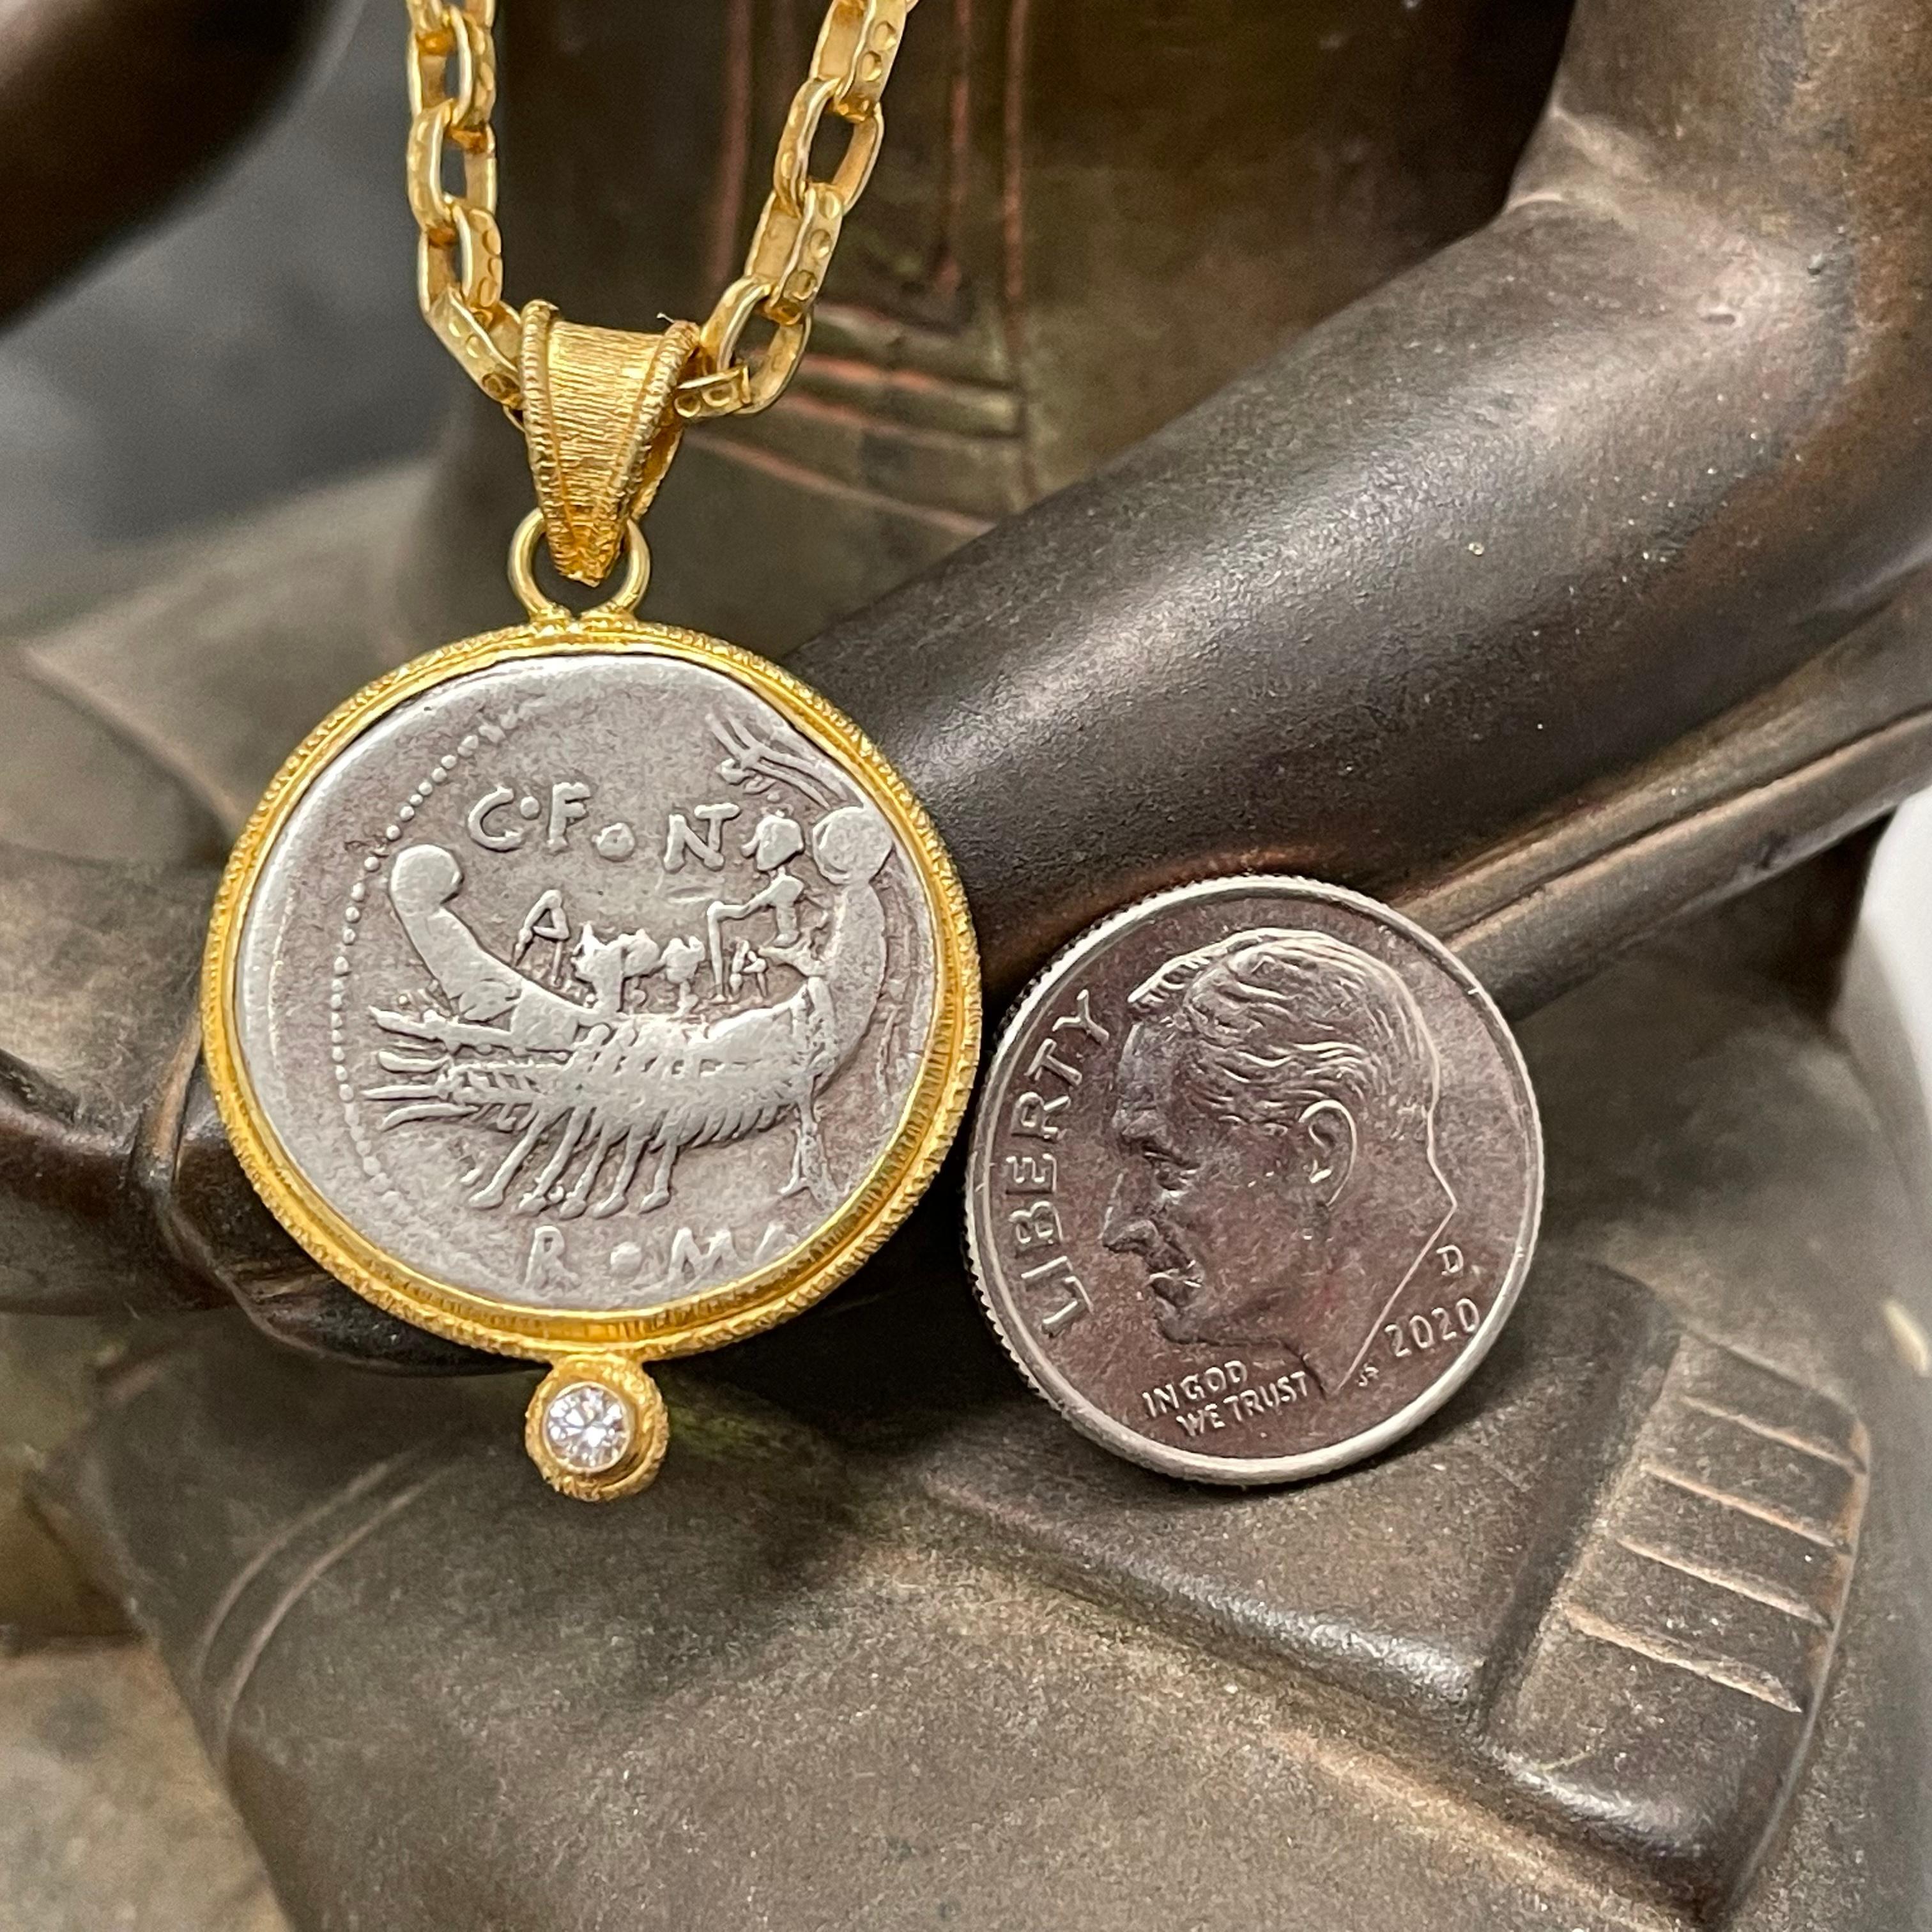 A fascinating authentic ancient Roman Republican silver denarius coin from 114 BC depicting a Roman war galley with rowers and pilot is set simply in an ancient-inspired Steven Battelle line texture bezel setting with a 2mm VS1 diamond accent below.